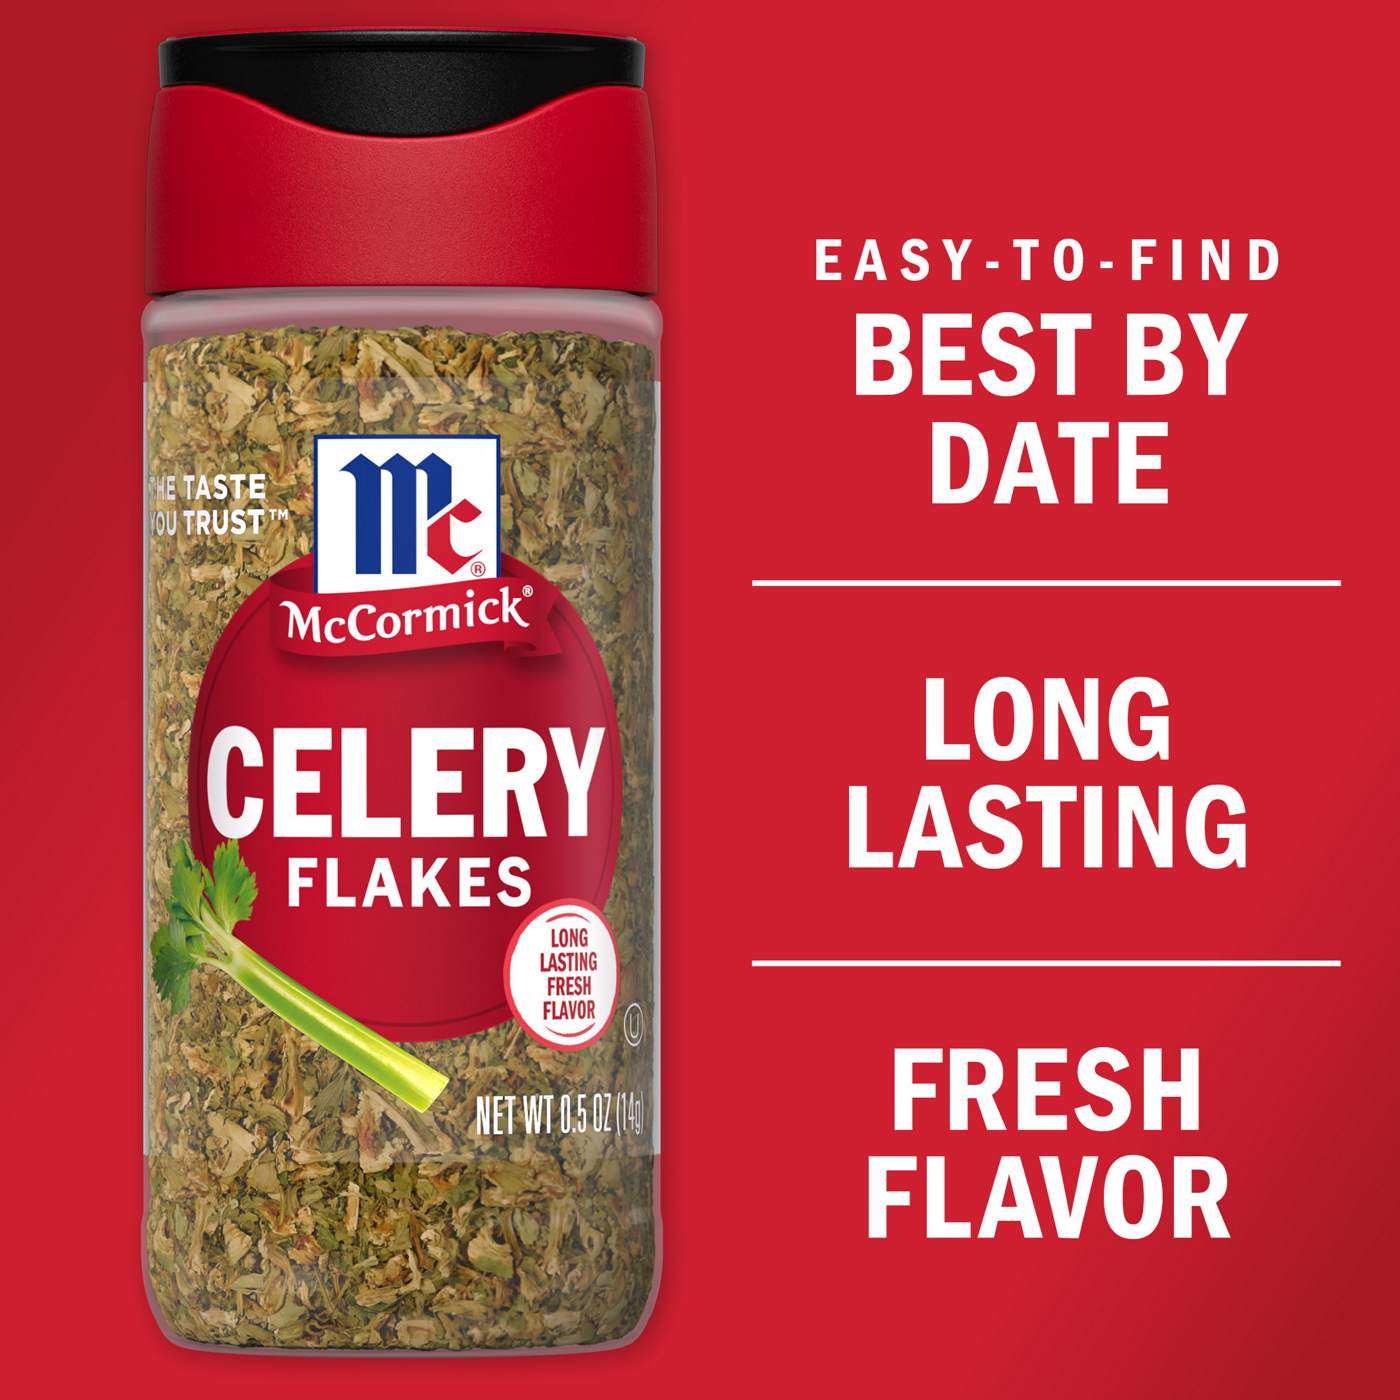 McCormick Celery Flakes; image 6 of 7